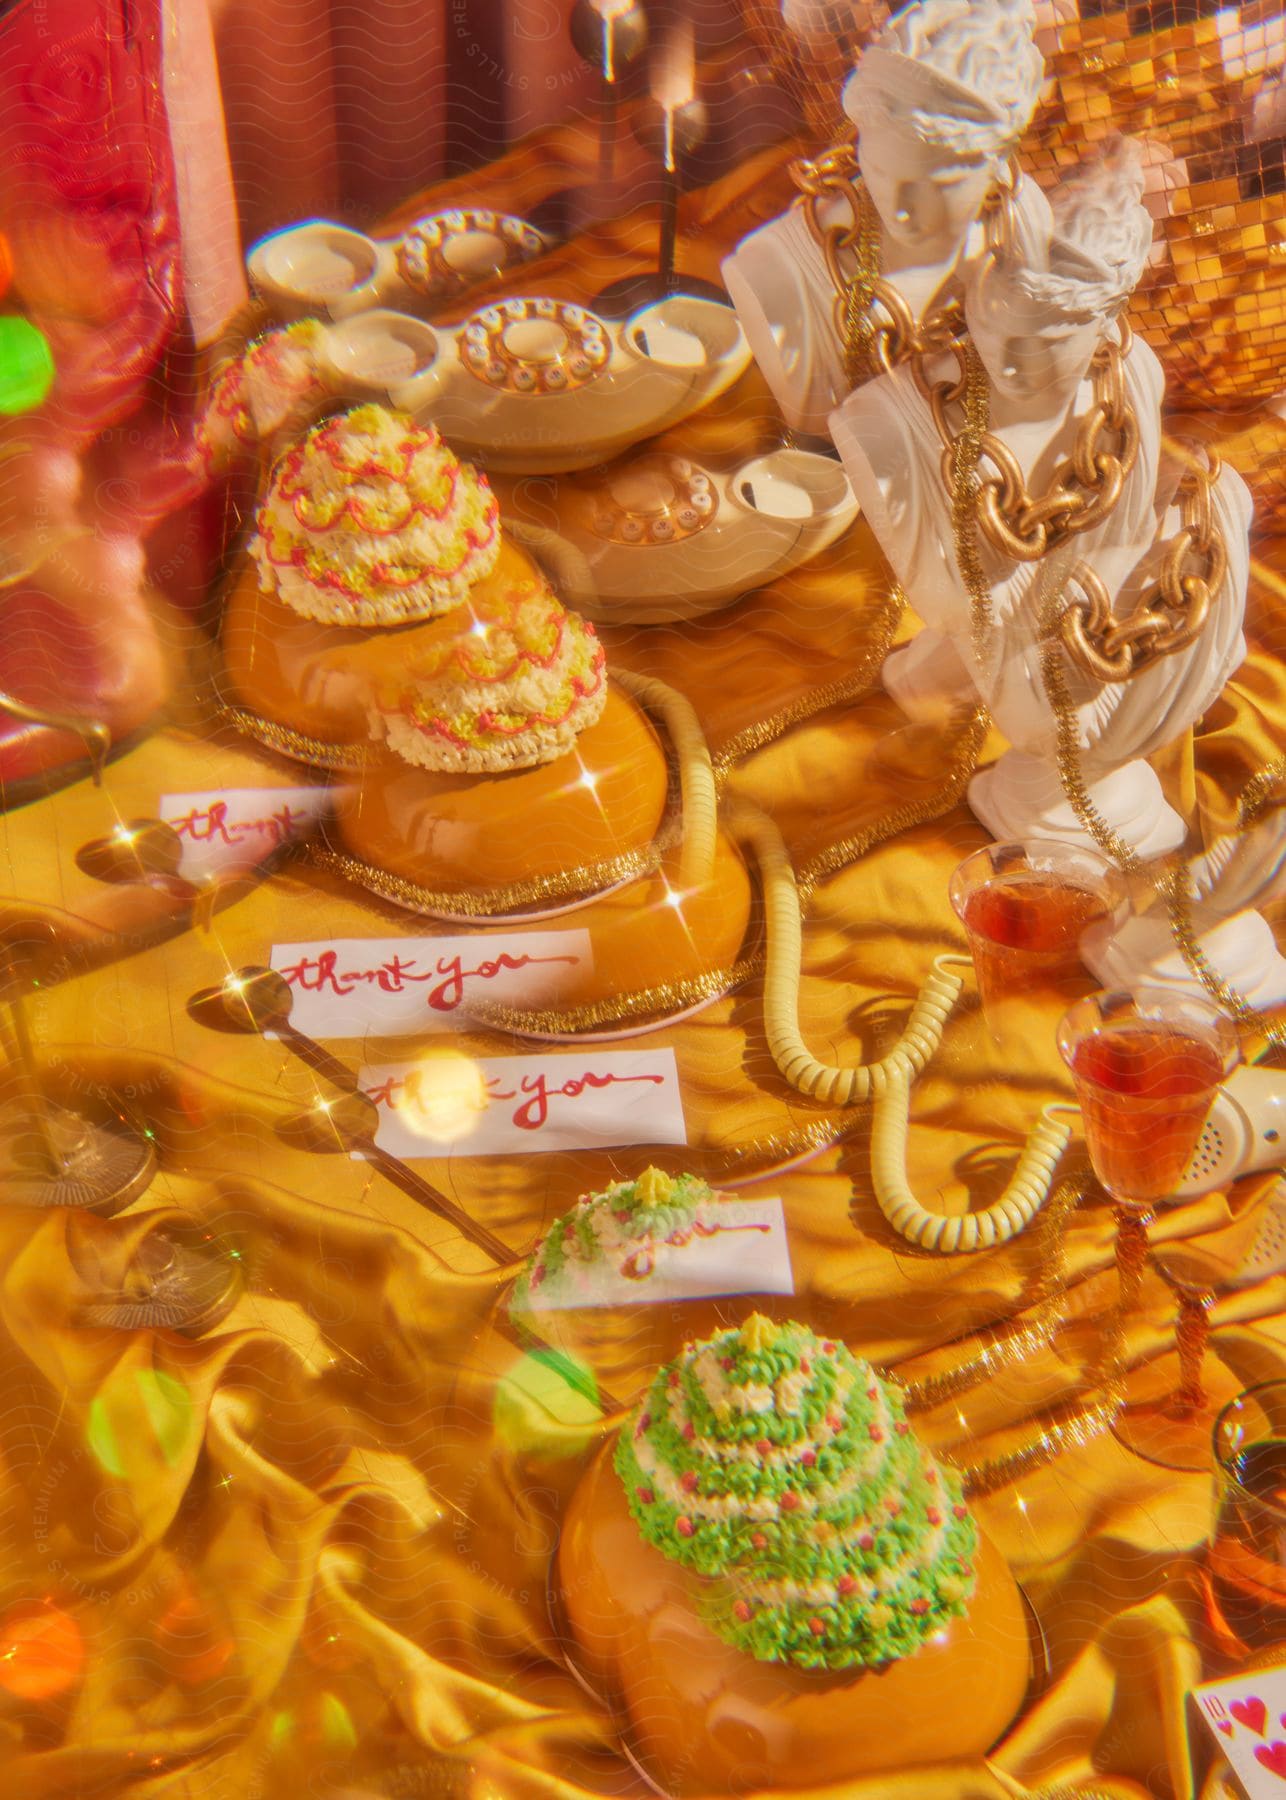 Multiple superimposed images of pastries statues cards and drinks on a table